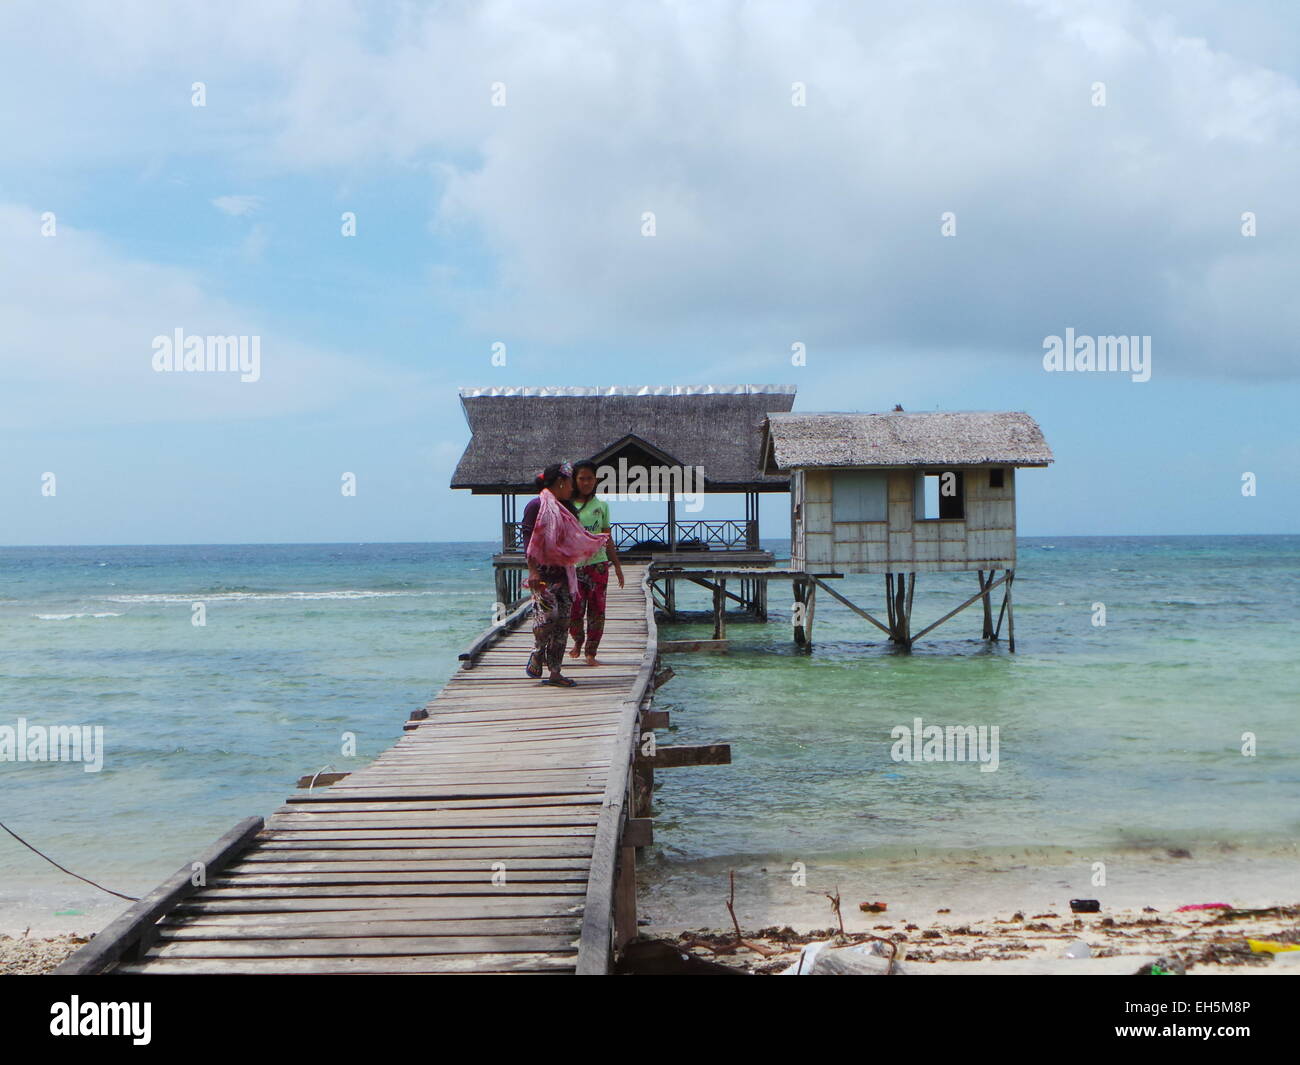 Tawi-Tawi is blessed with pristine beaches, but there are few tourist visiting the area due to peace and security issue in Mindanao. © Sherbien Dacalanio/Pacific Press/Alamy Live News Stock Photo